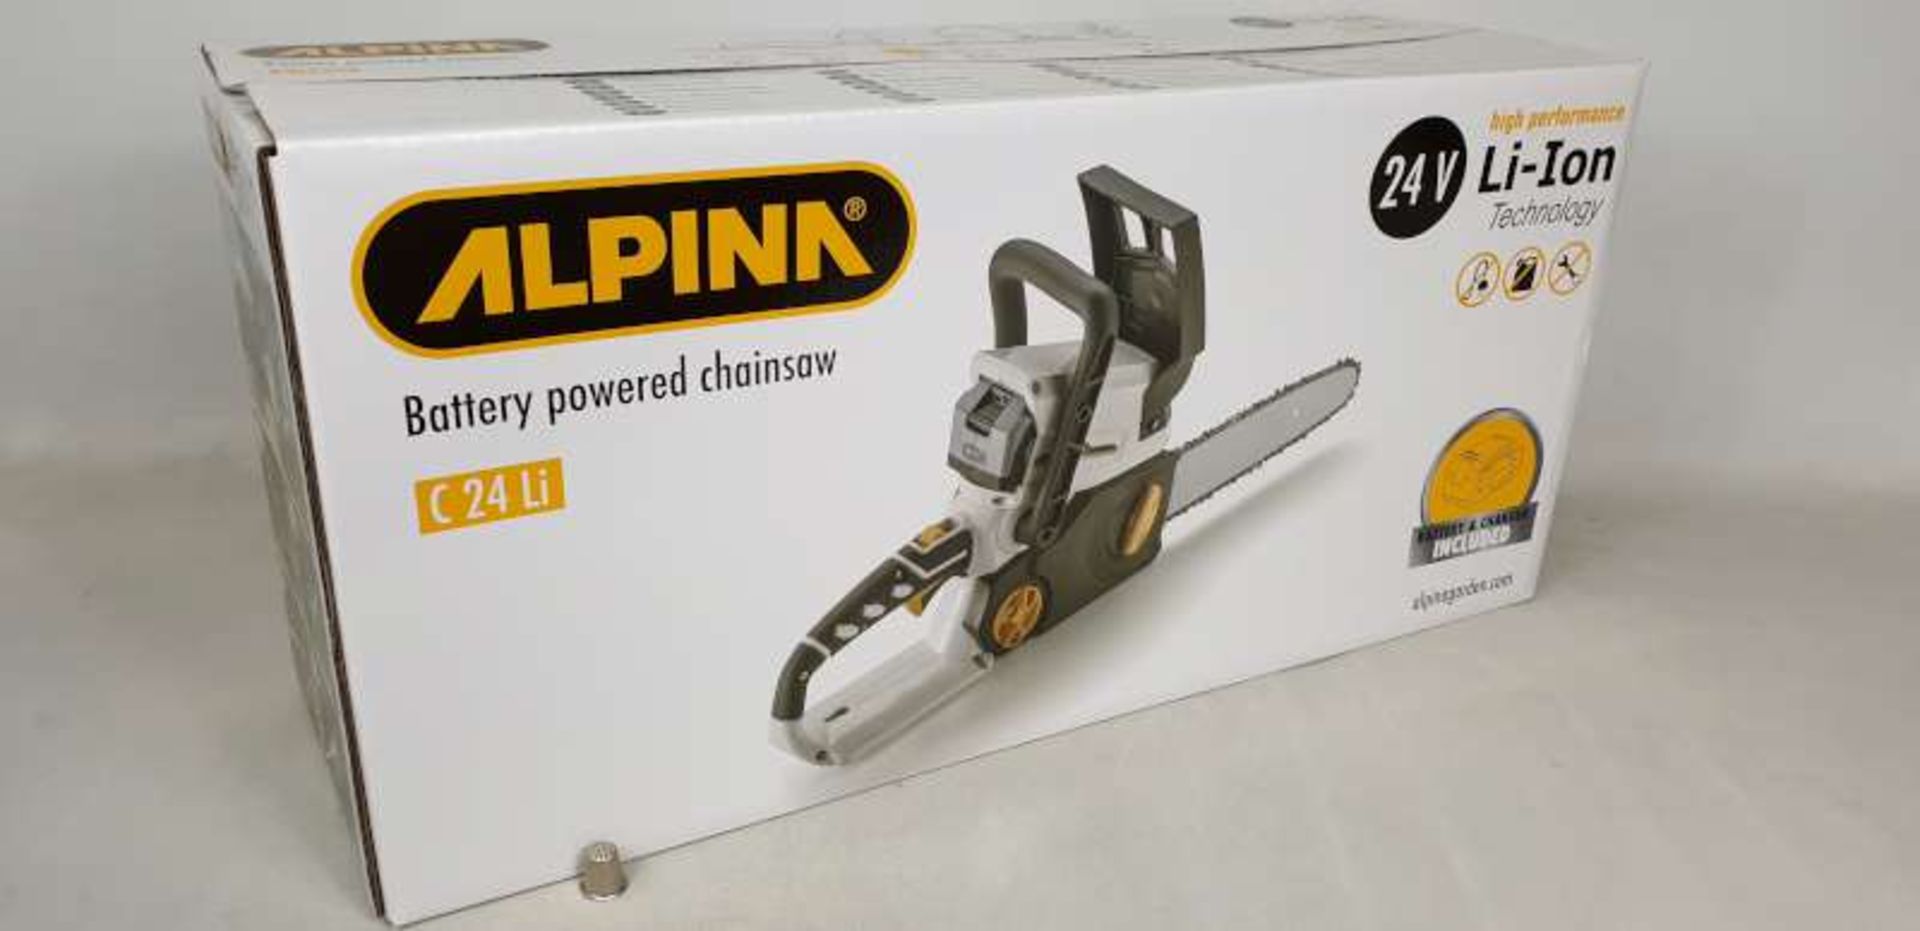 BRAND NEW BOXED ALPINA 24 VOLT LI - ION HIGH PERFORMANCE TECHNOLOGY BATTERY POWERED CHAINSAW,